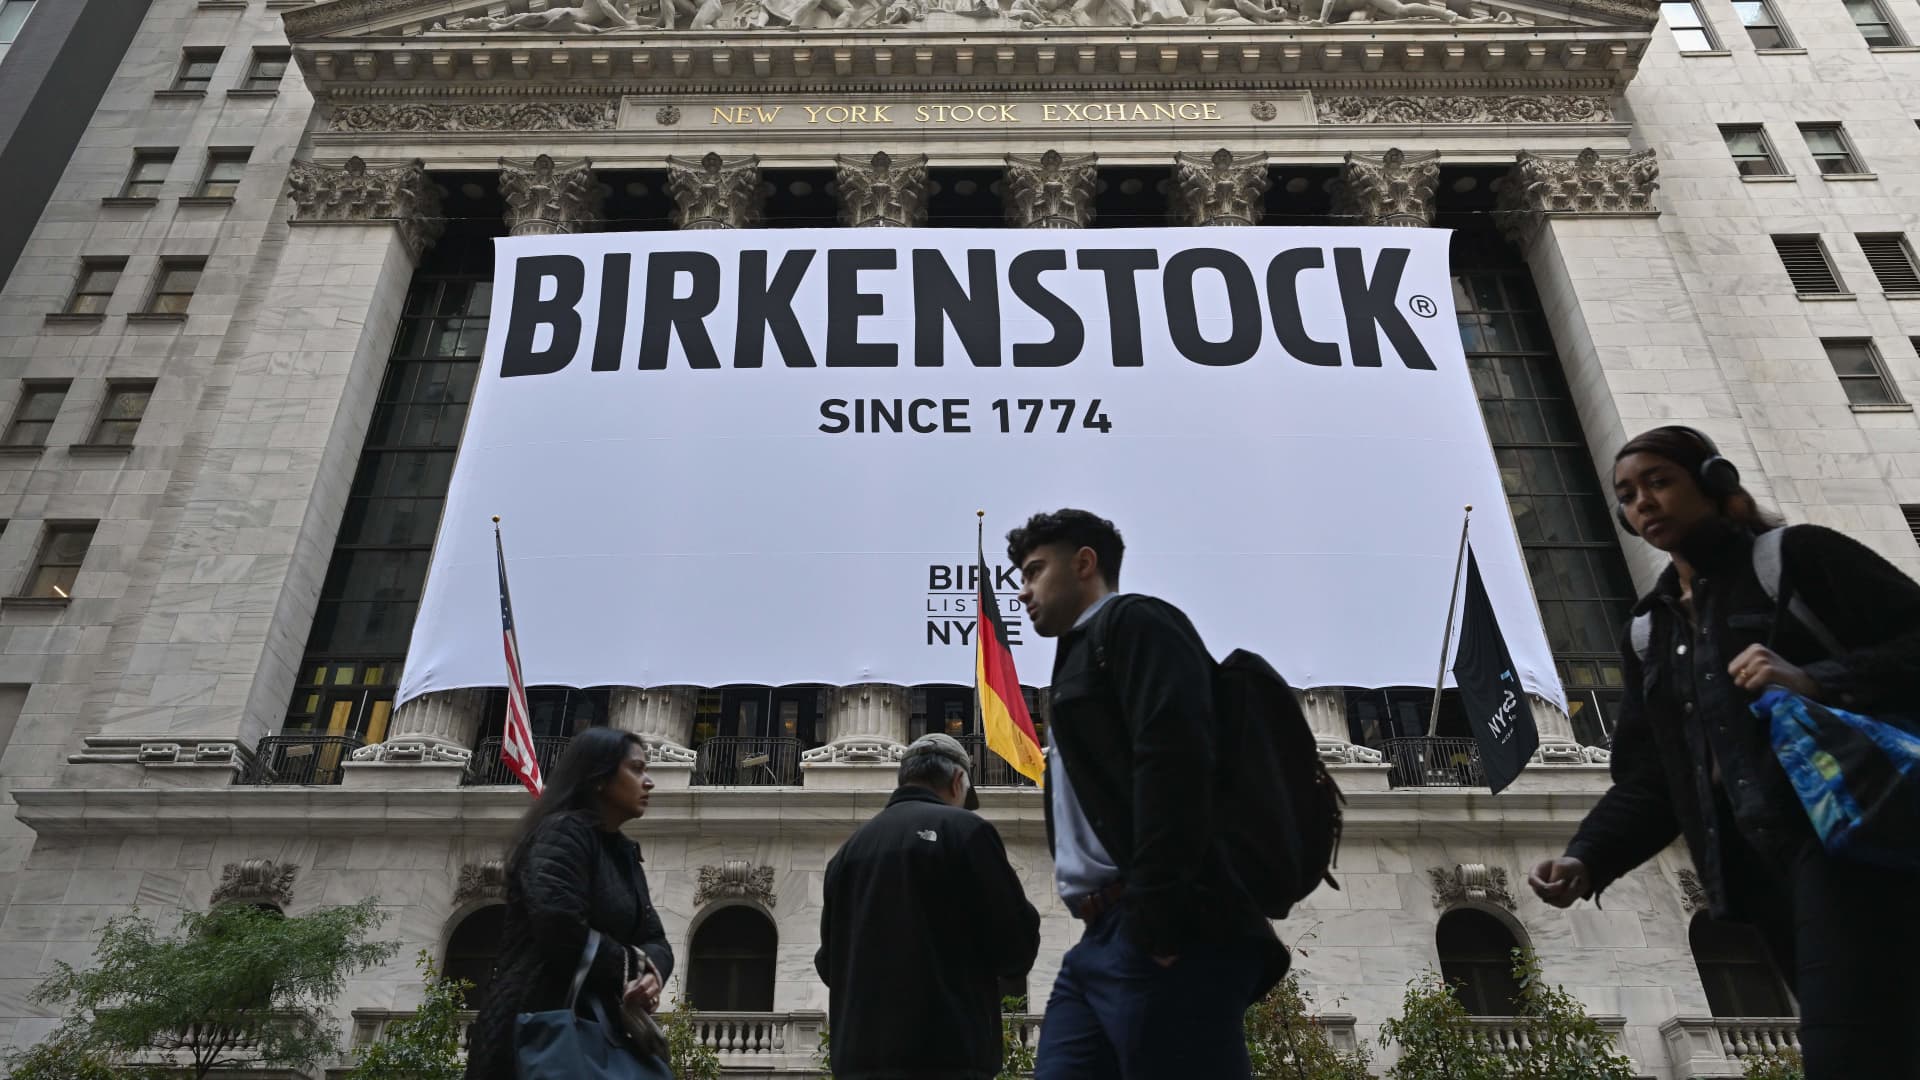 Birkenstock slides more than 12% in stock market debut after opening at $41 per share